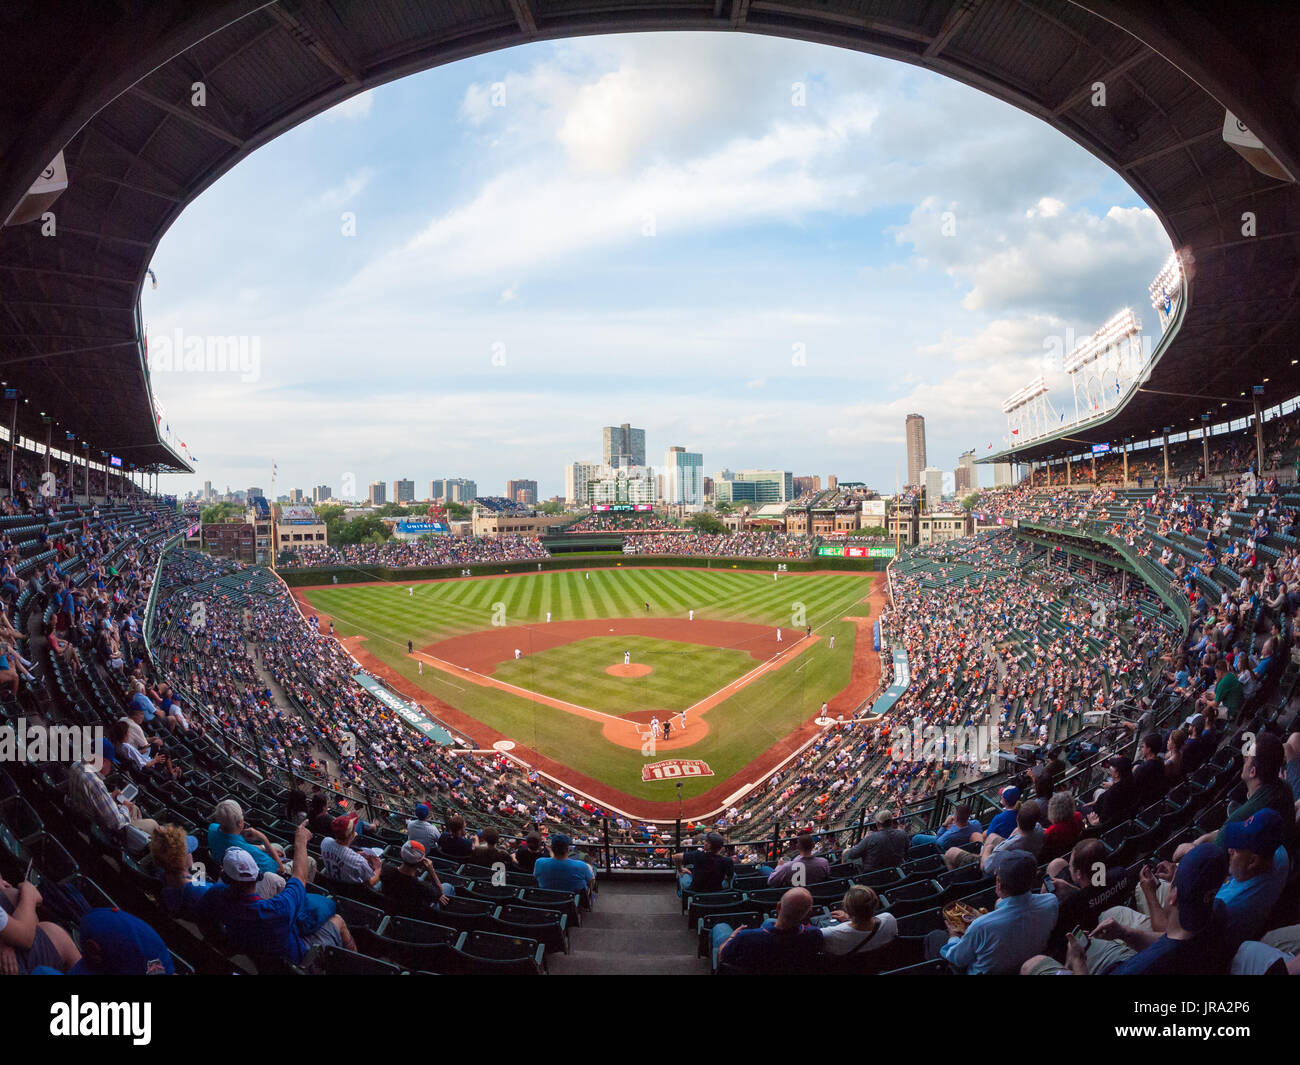 A fisheye, wide angle view of Wrigley Field during a Chicago Cubs and San Francisco Giants baseball game on August 20, 2014. Wrigley Field, Chicago. Stock Photo